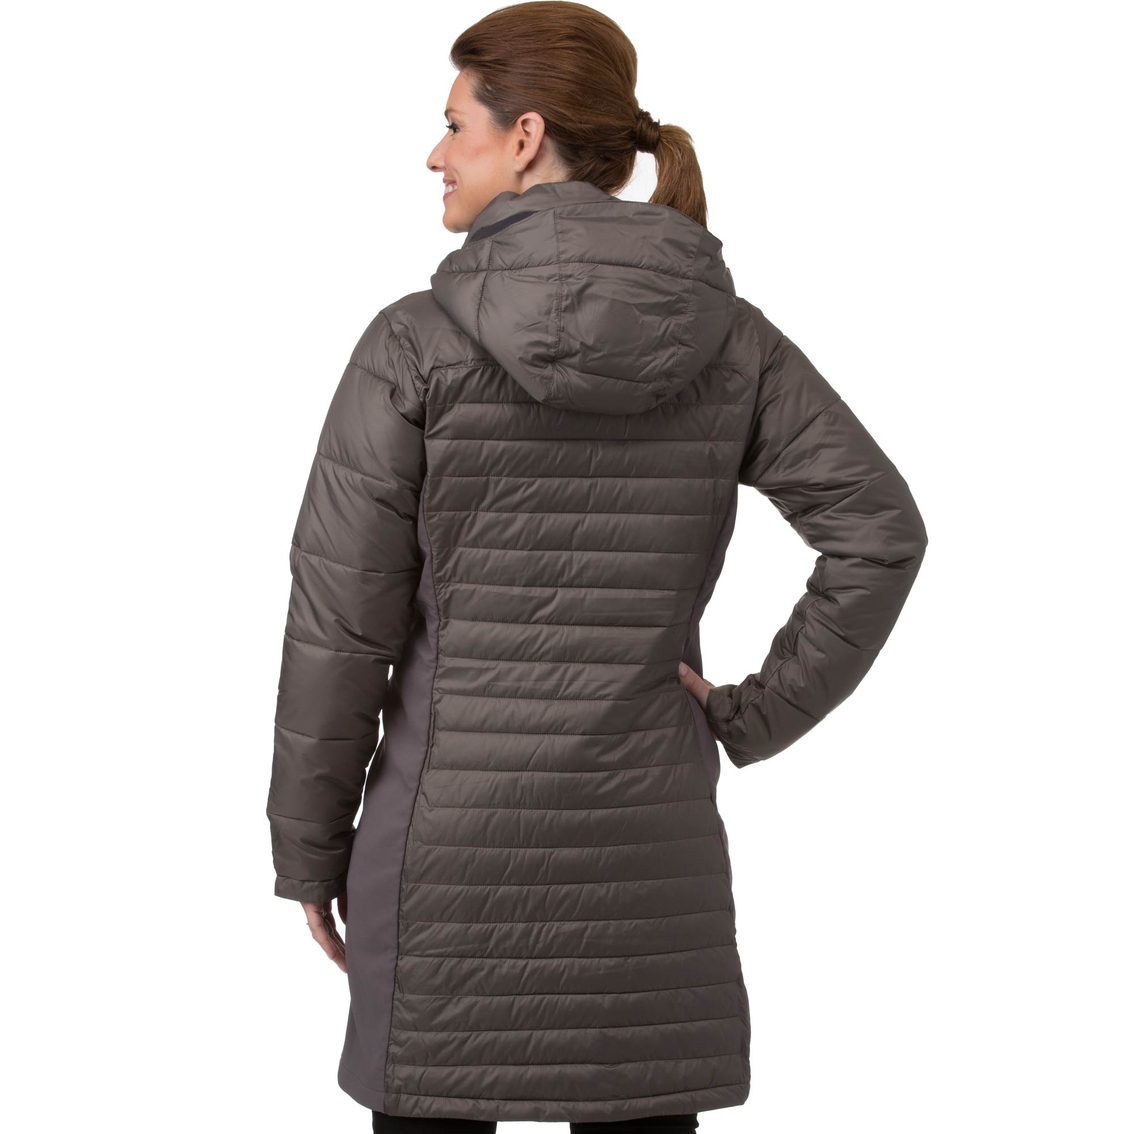 Columbia Powder Pillow Hybrid Jacket, Jackets, Clothing & Accessories